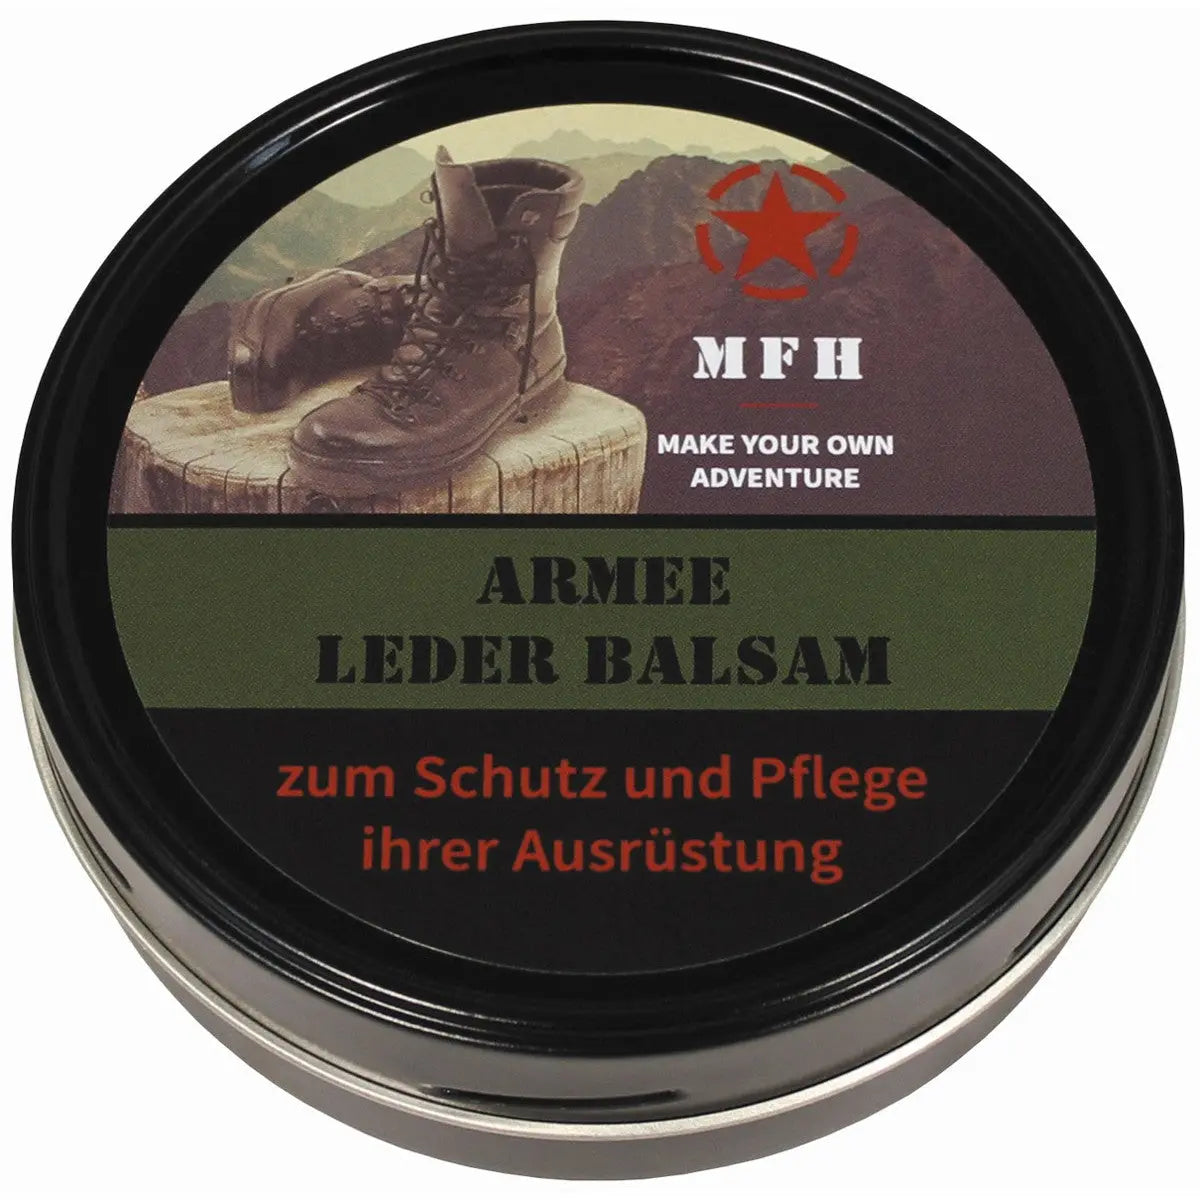 Leather Balsam, "Army", colourless, 150 ml can NSO Gear